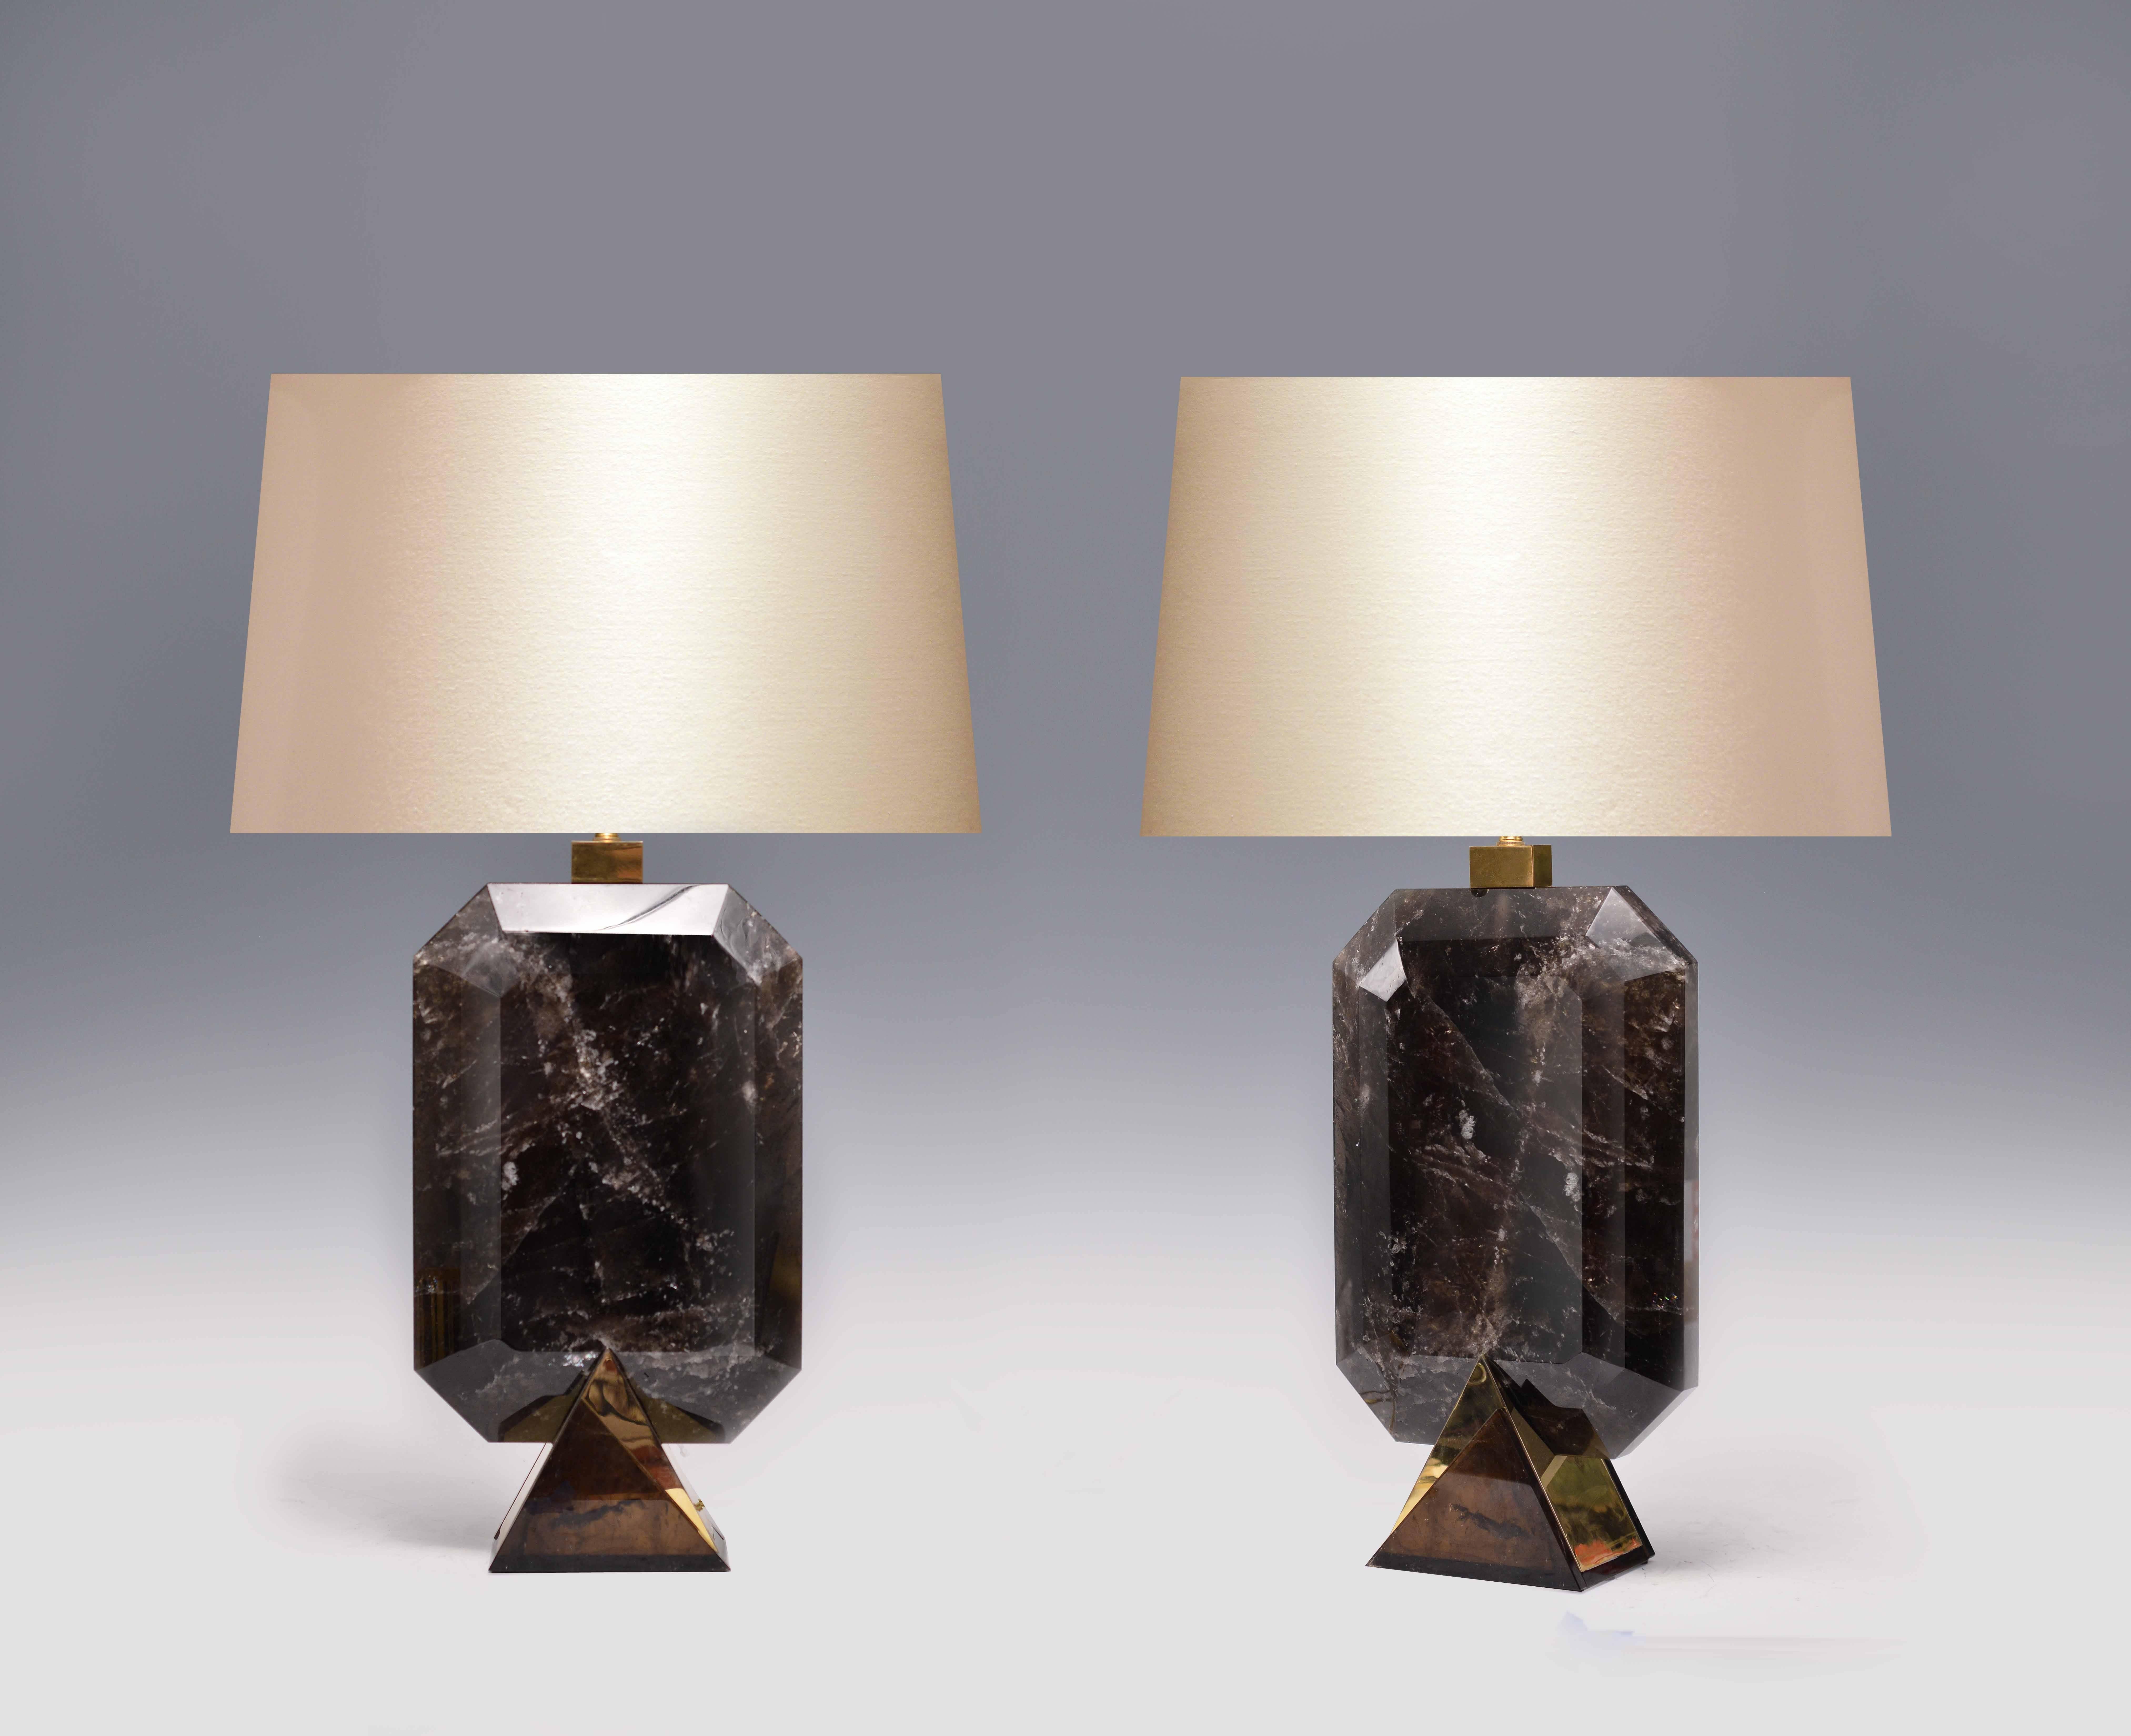 A fine carved diamond form smoky rock crystal quartz lamp with polish bronze base, created by Phoenix
To the rock crystal: 13.25